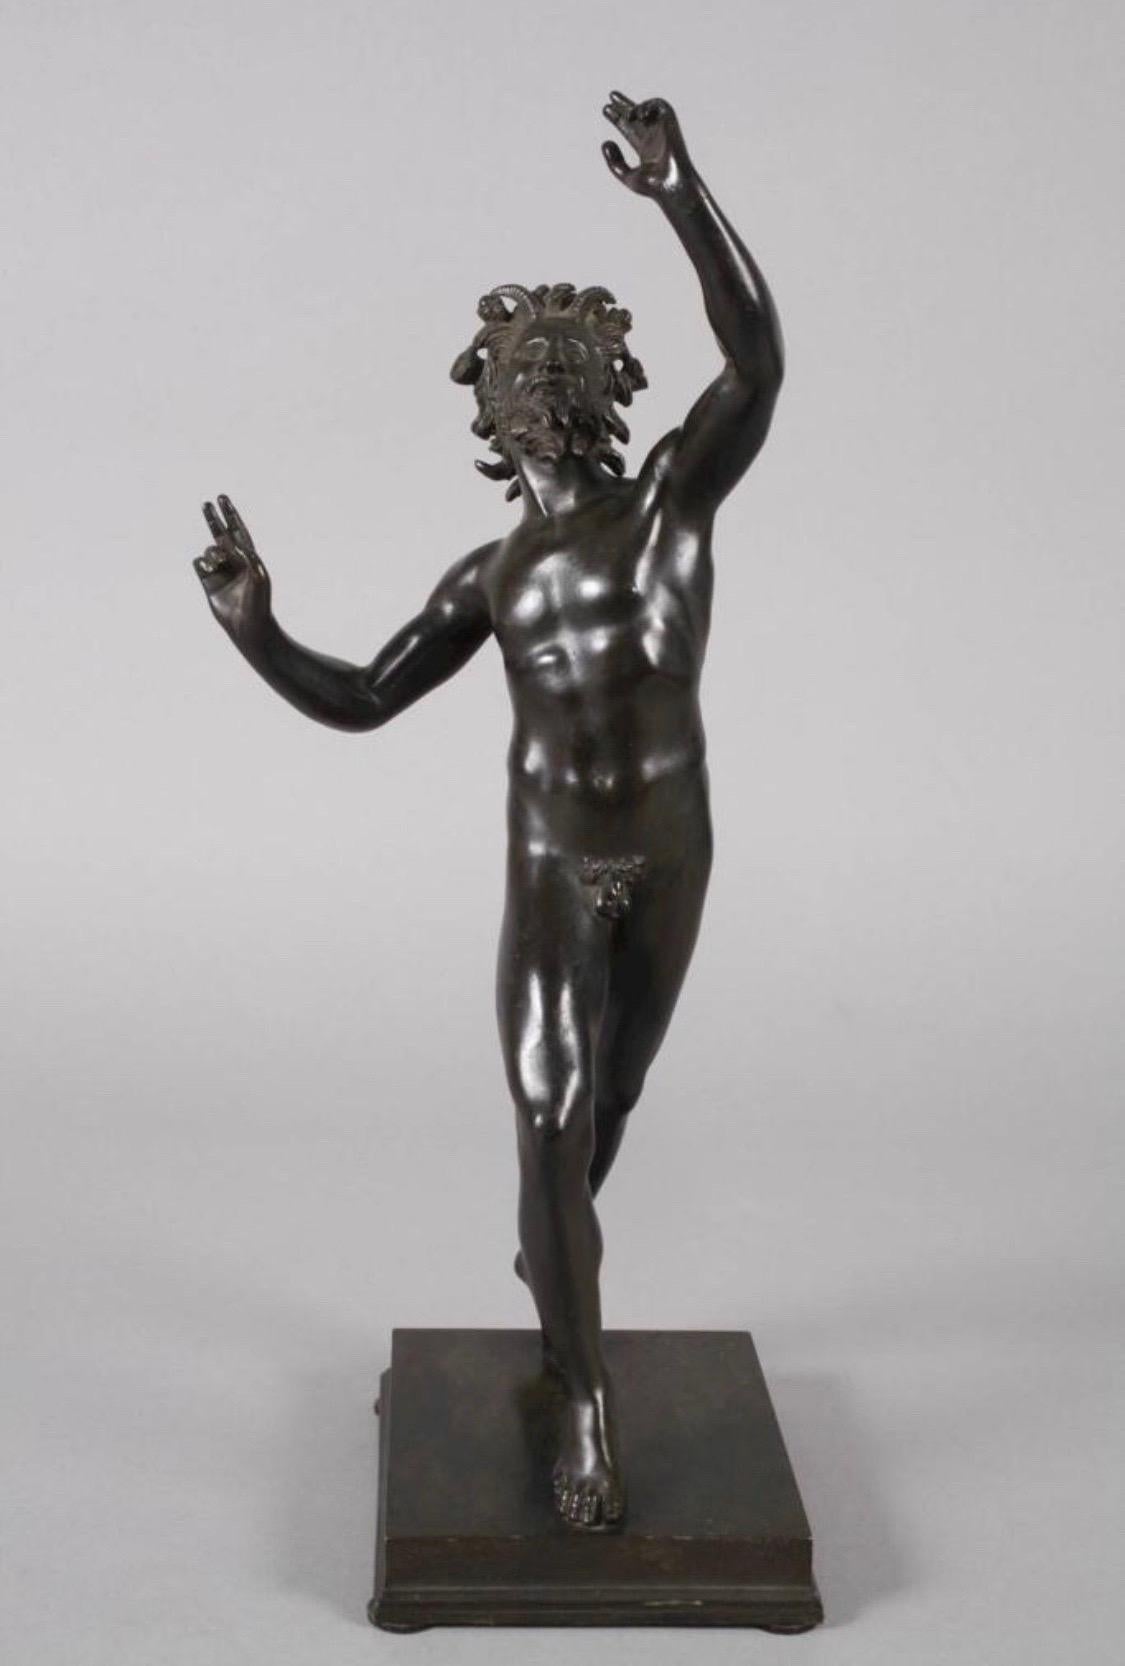 Faun in bronze signed Fonderia G. Sommer Napoli. Height: 45cm. In perfect condition.